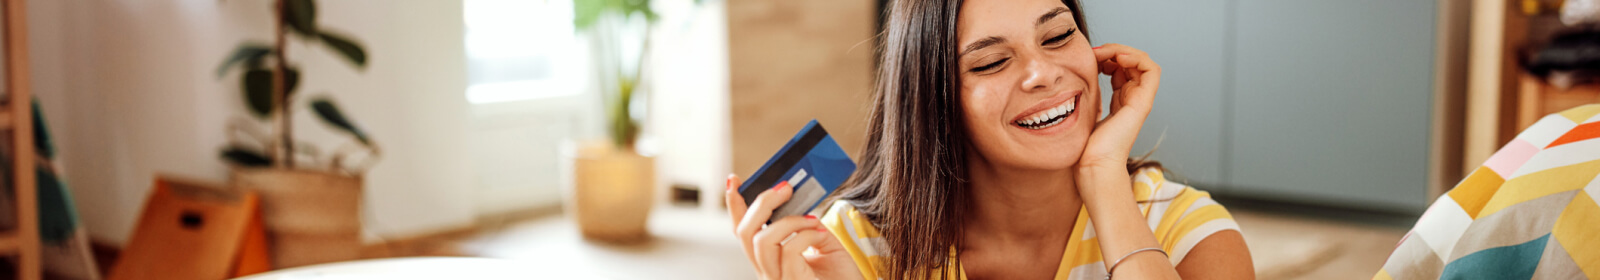 Woman in her home smiling while holding her debit card